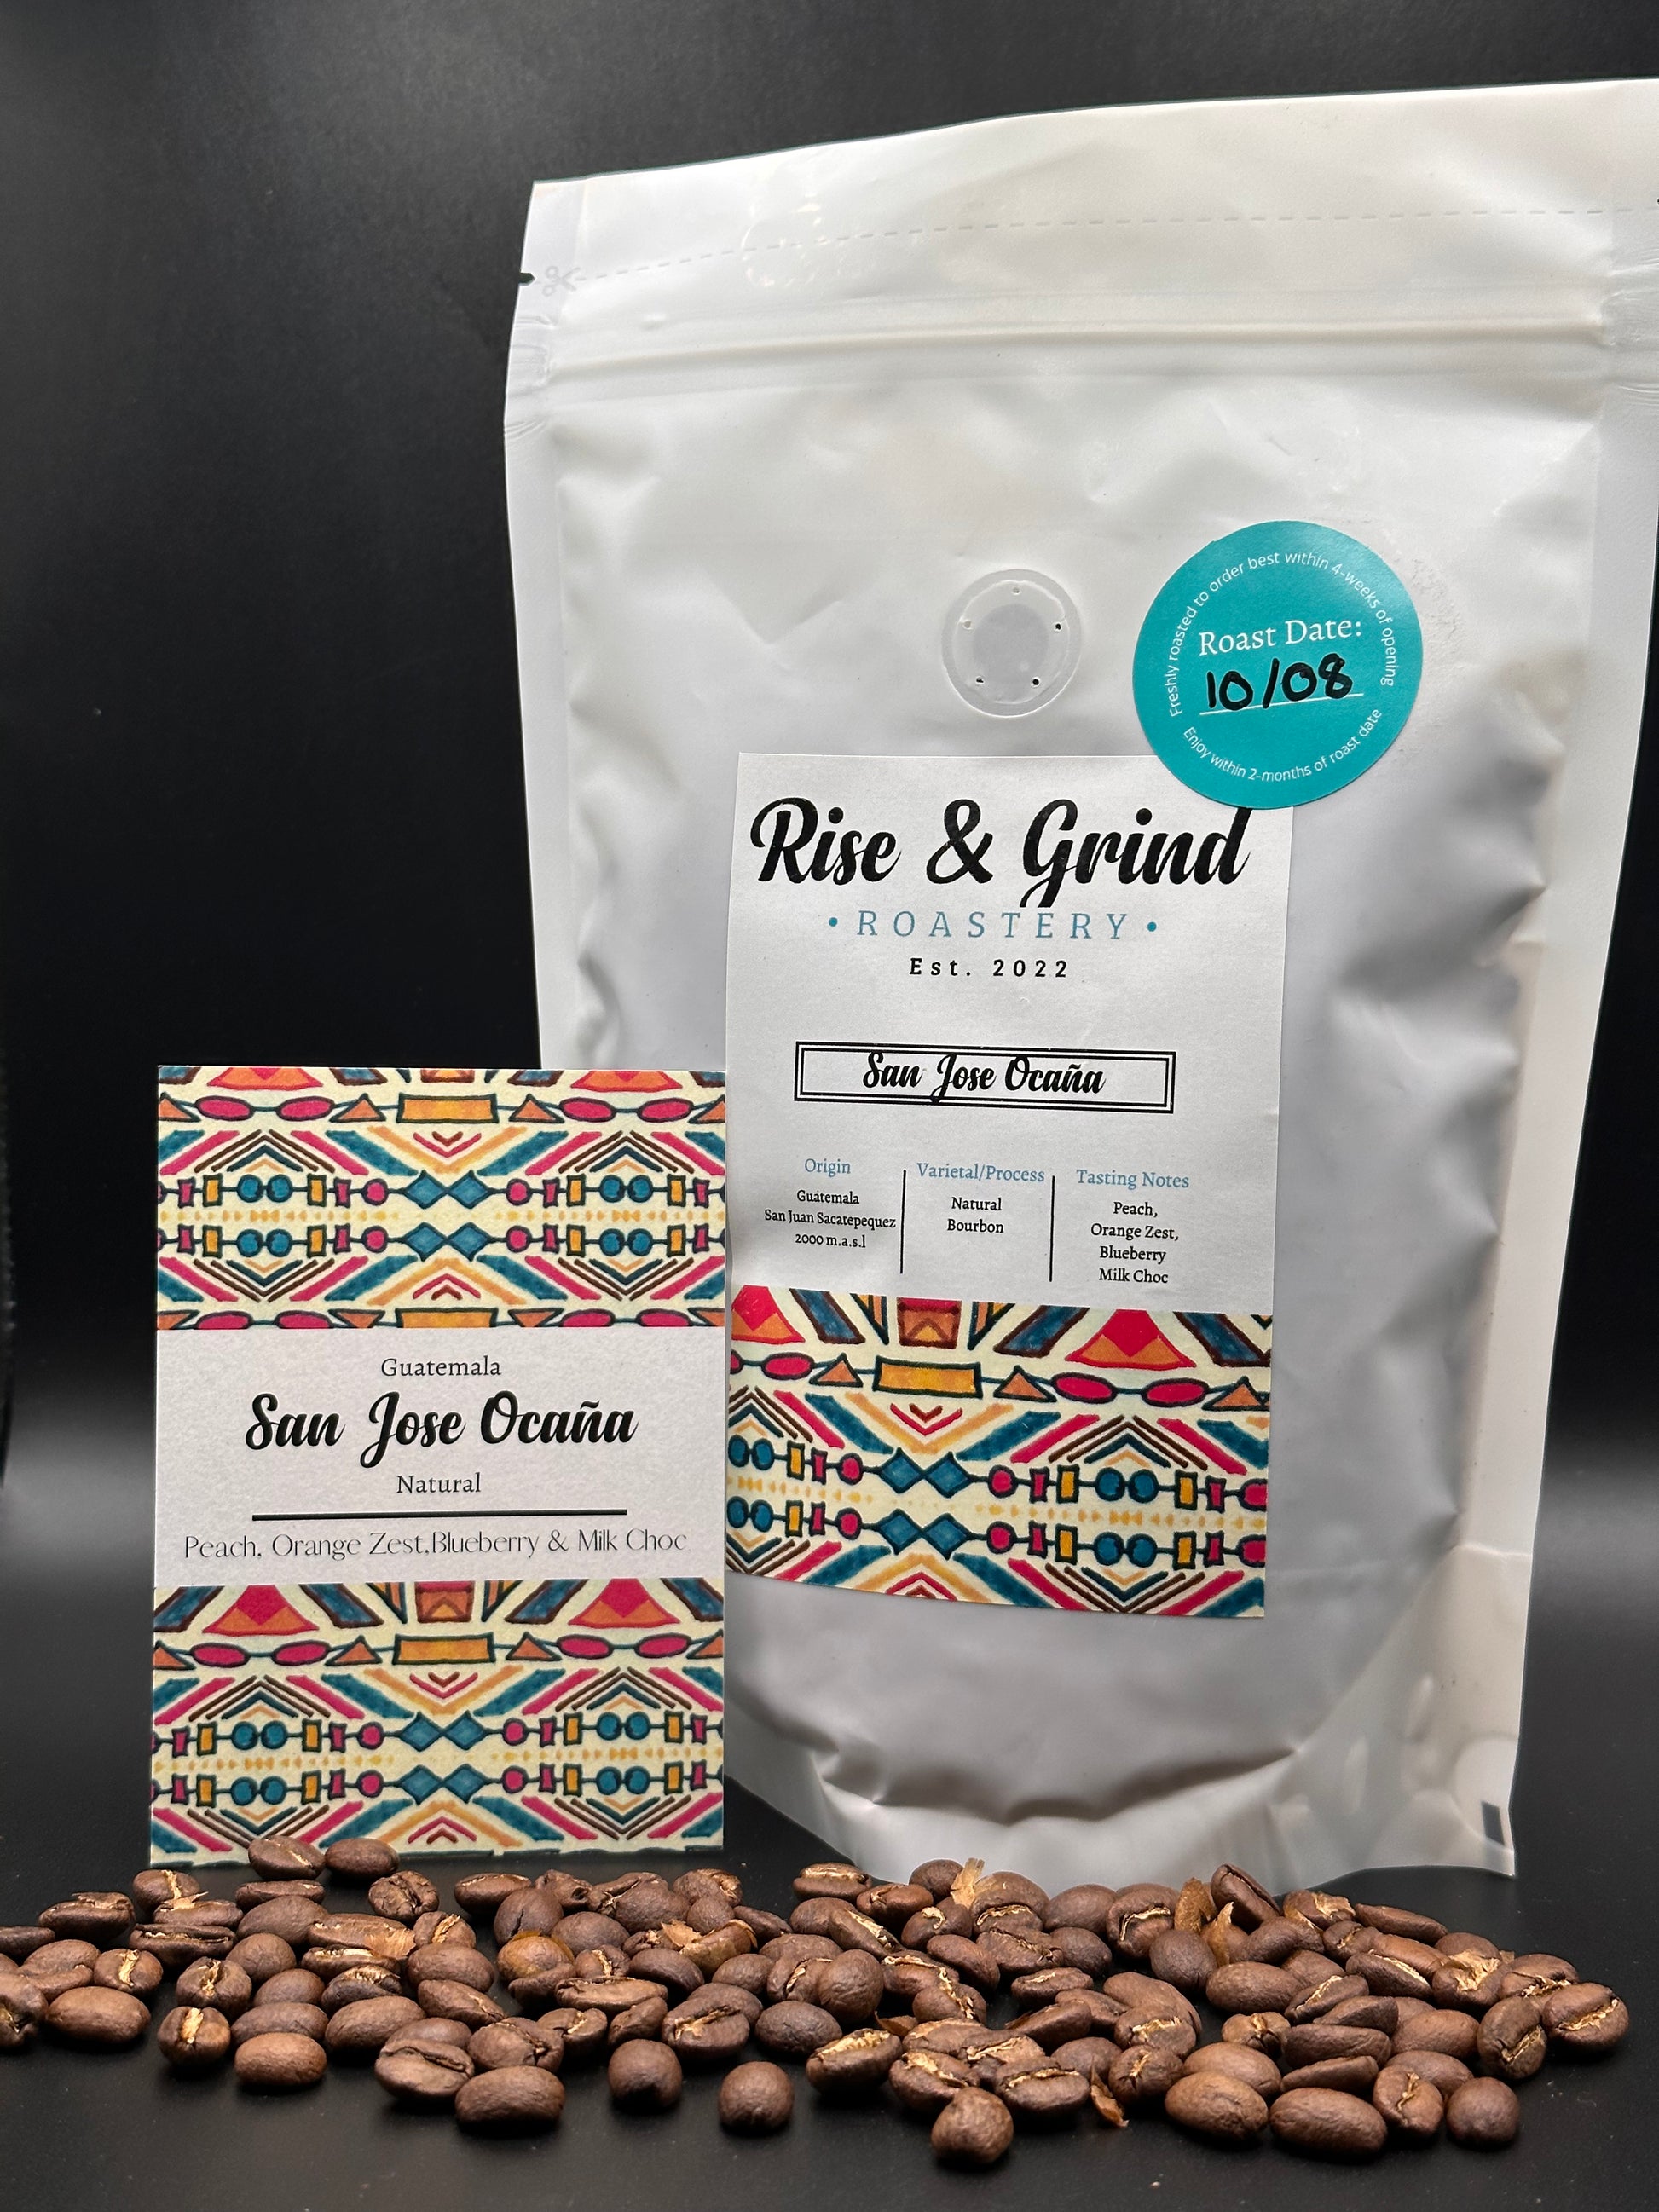 Discover the world of specialty coffee with our monthly subscription service. Each month, indulge in a new coffee experience, meticulously curated and freshly roasted to perfection. Join us on a journey of exploration and delight as we showcase the finest beans from around the globe, delivered conveniently to your doorstep. Bag 4